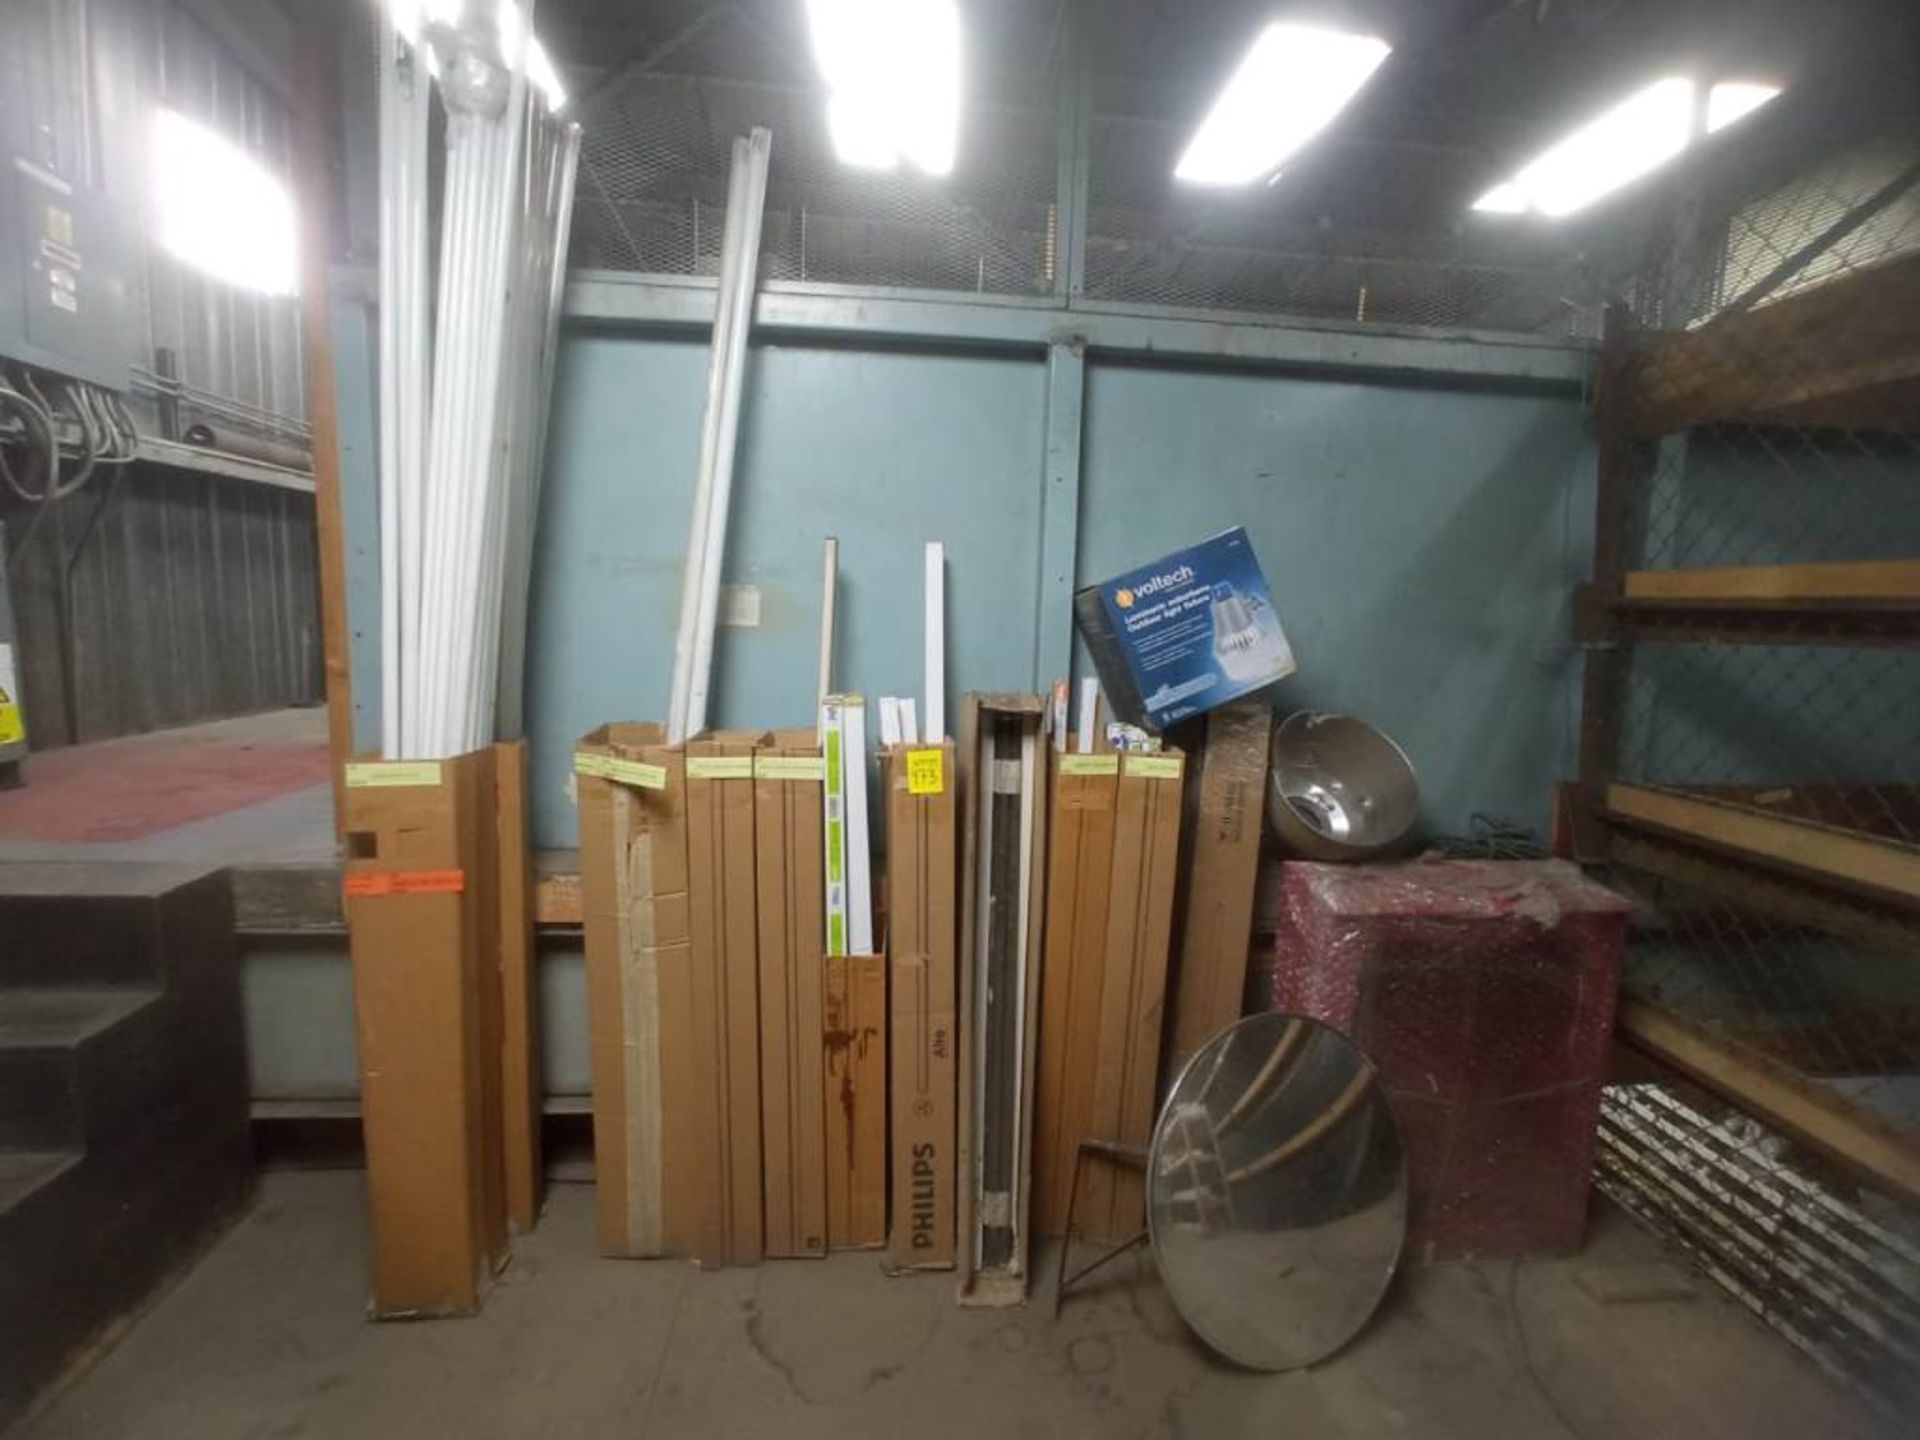 Lot contents of 9 boxes: 4 and 8 ft. fluorescent lamps, 1 fire hose cabinet, black lamps, 1 convex